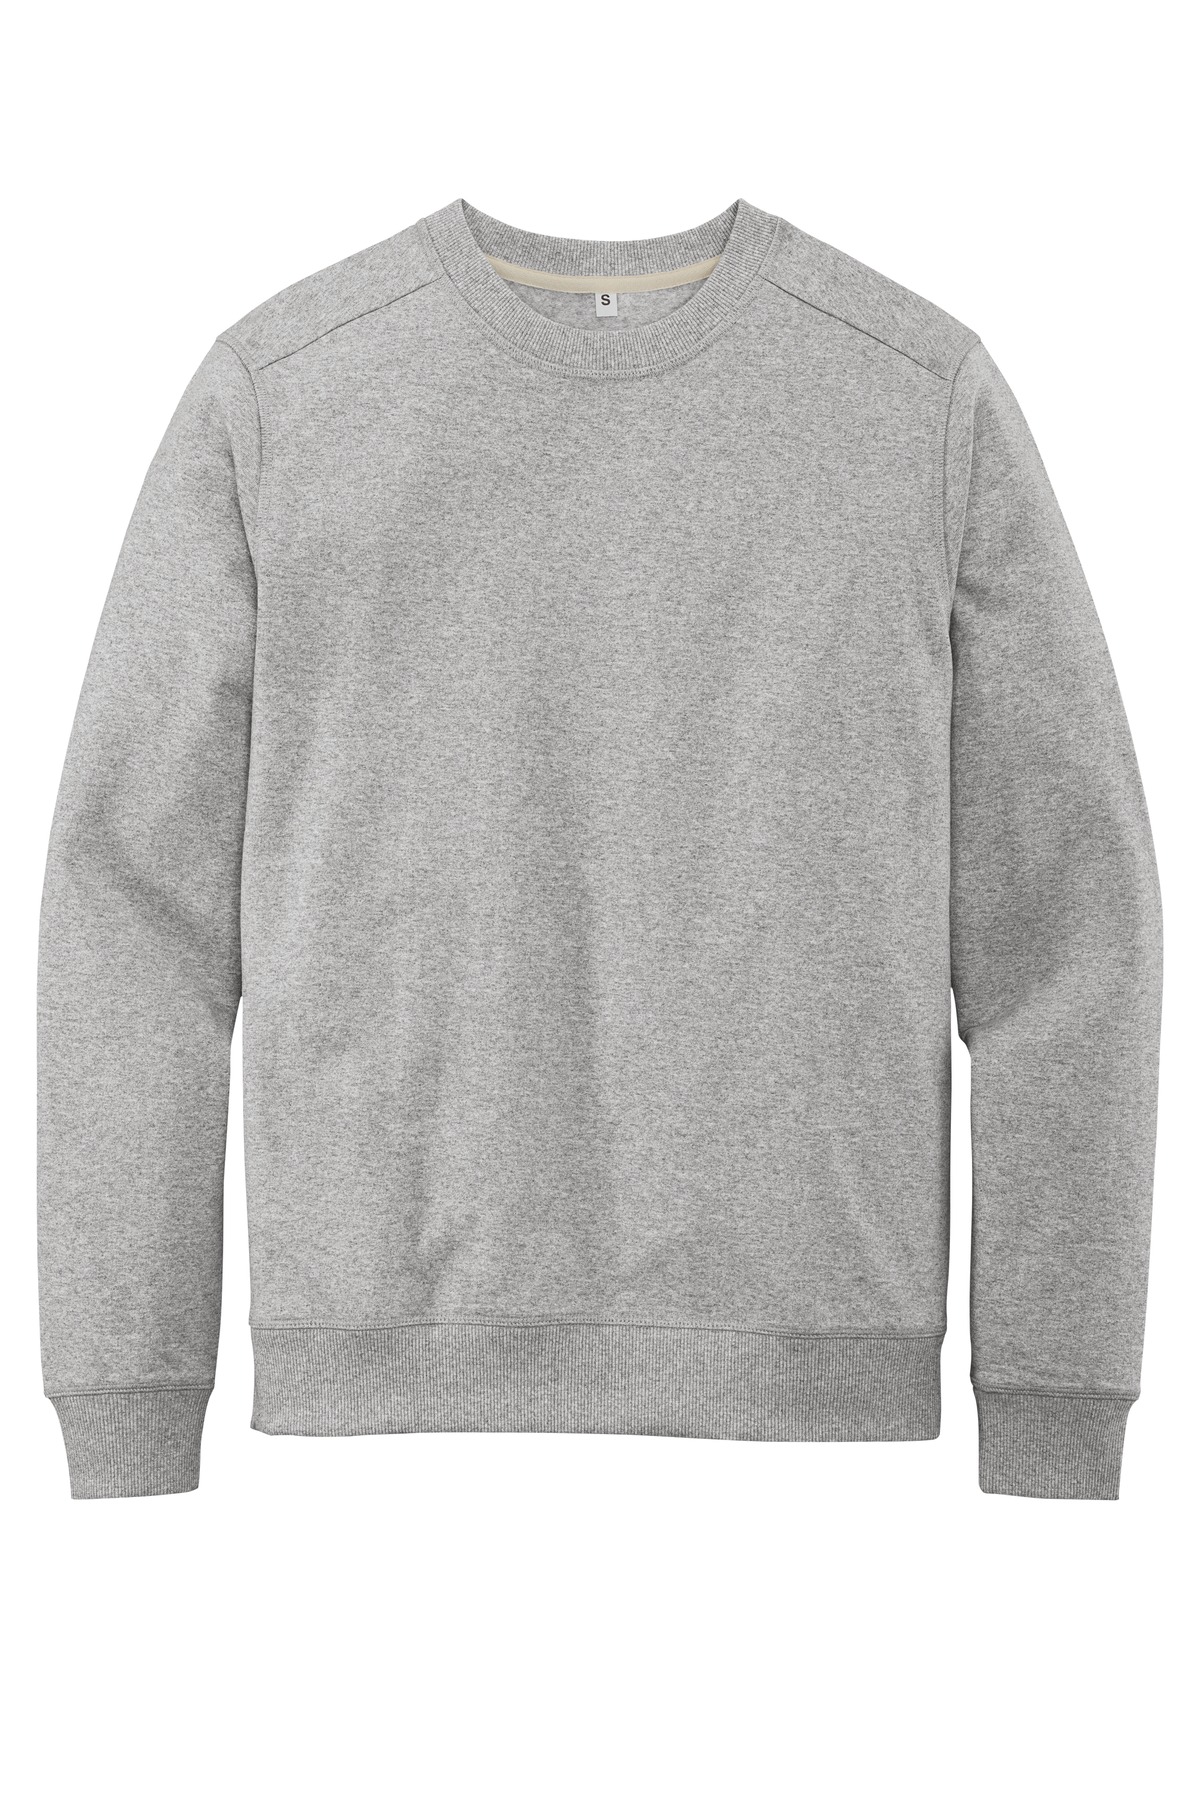 click to view Light Heather Grey